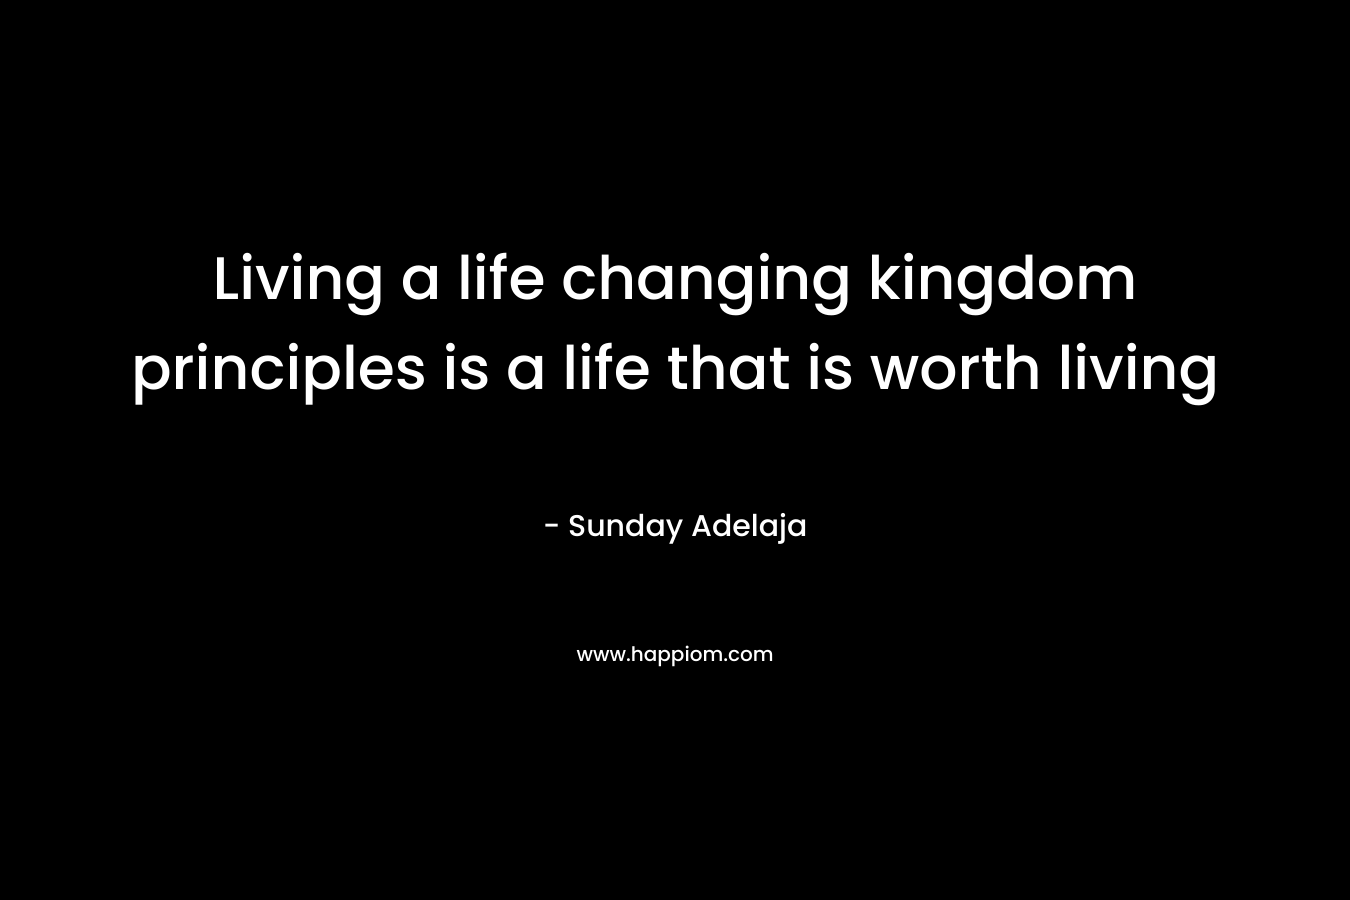 Living a life changing kingdom principles is a life that is worth living